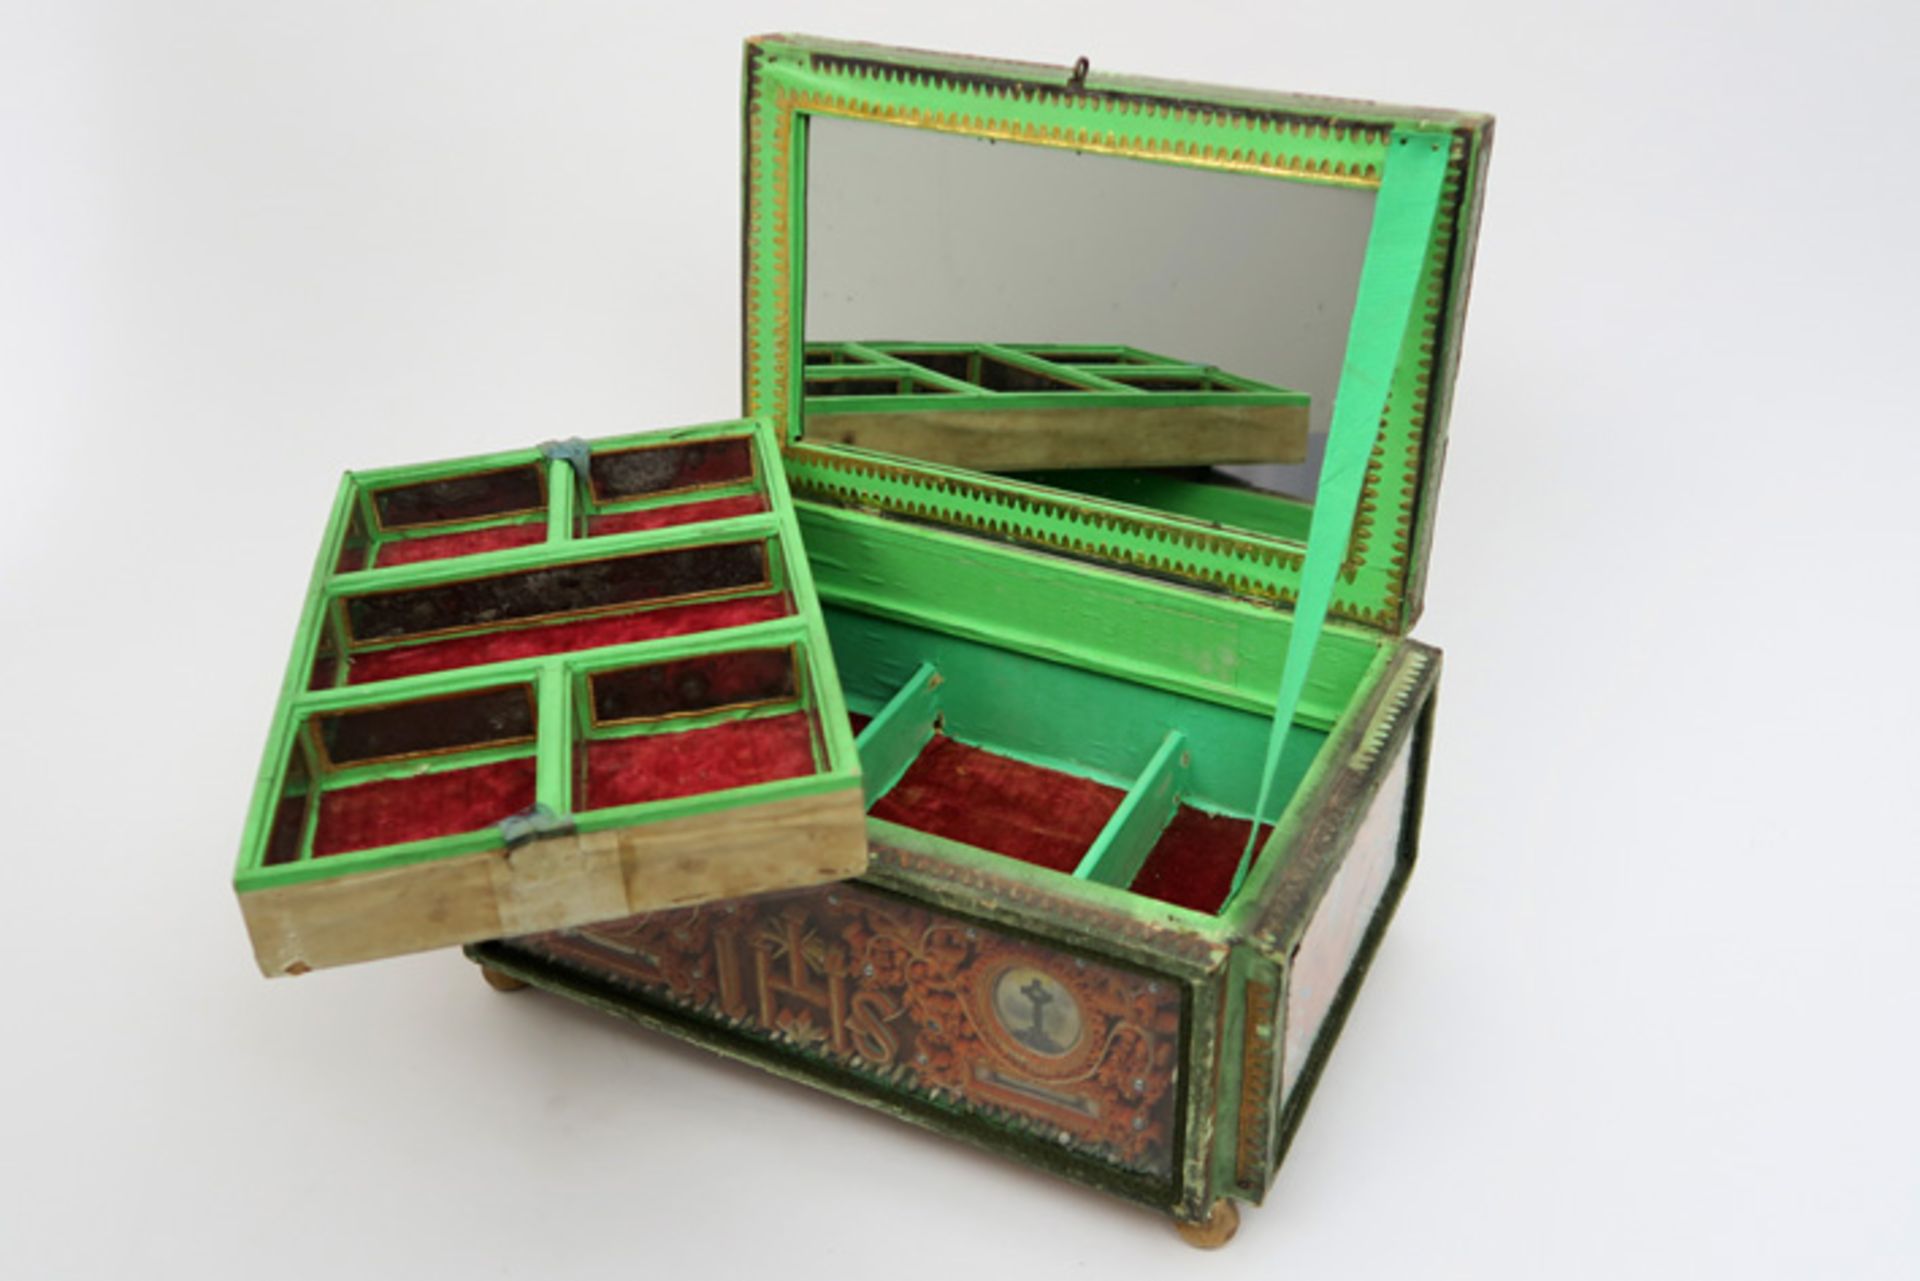 19th "Folk Art" box in painted wood and glass with relics VOLKSKUNST - 19° EEUW kistje in - Bild 3 aus 5